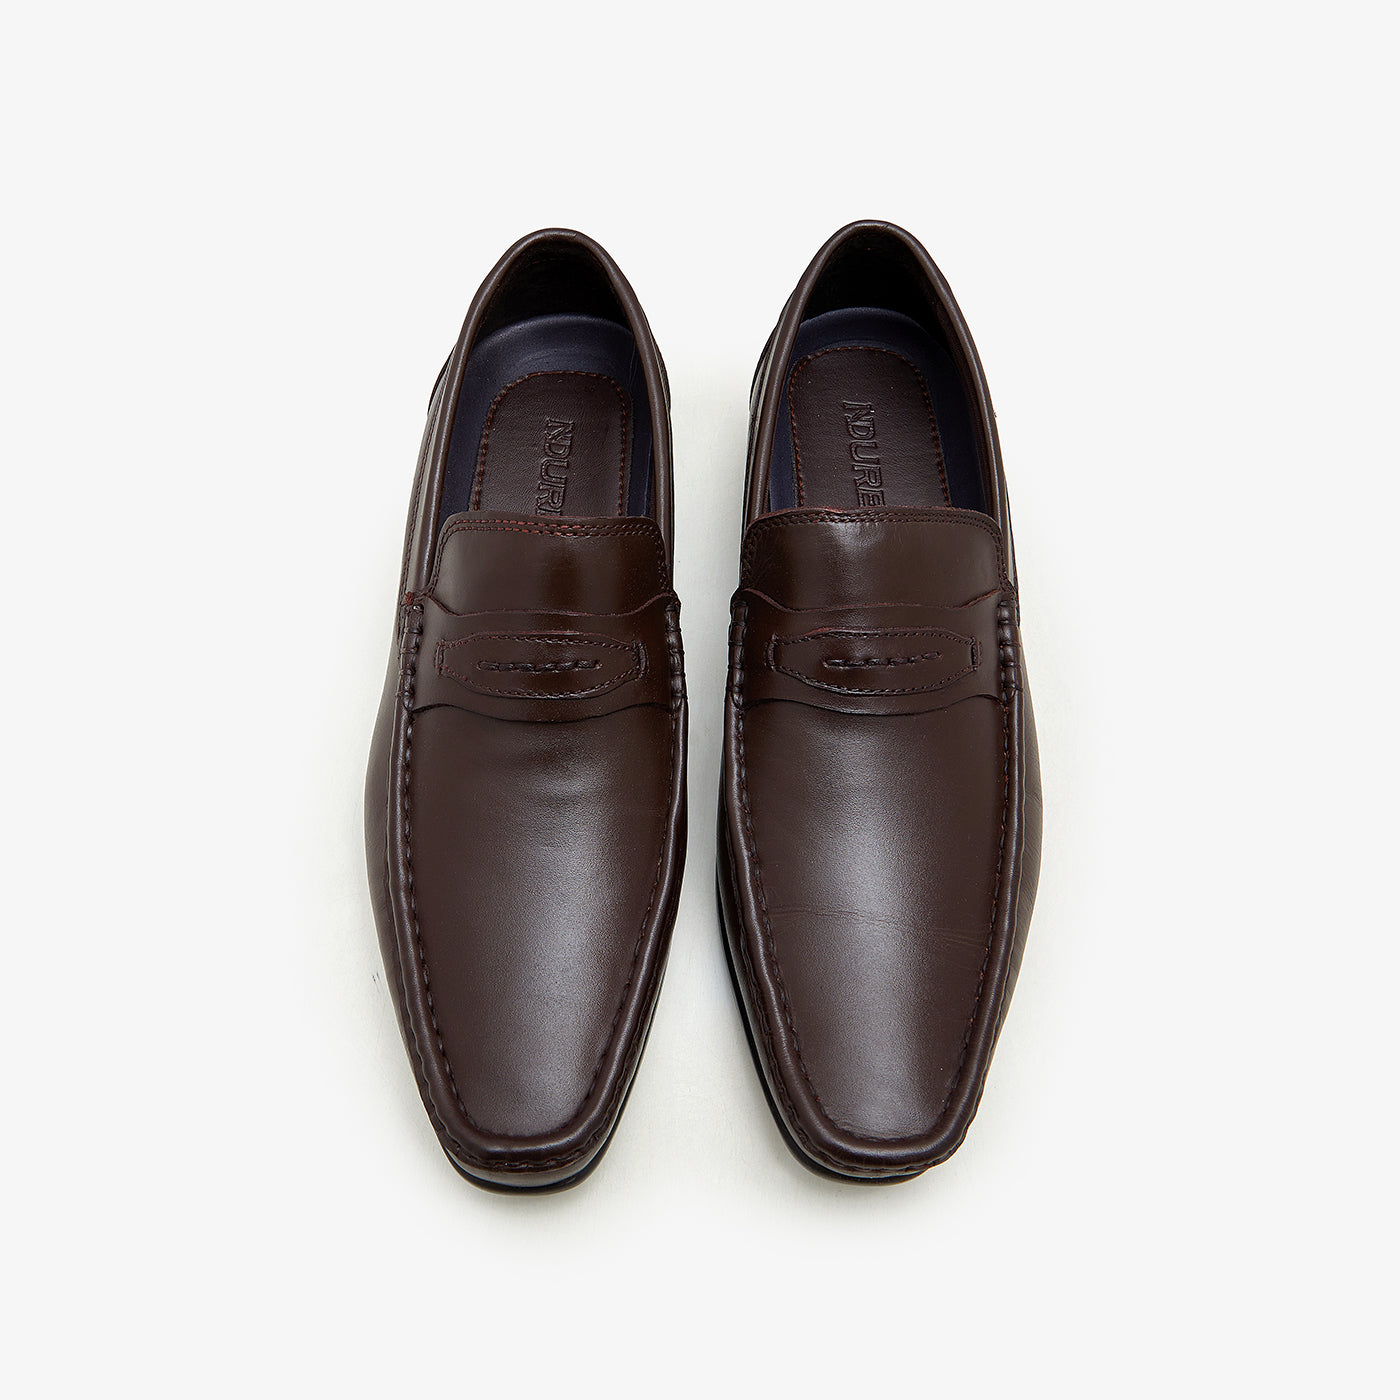 Men's Smart Casual Loafers